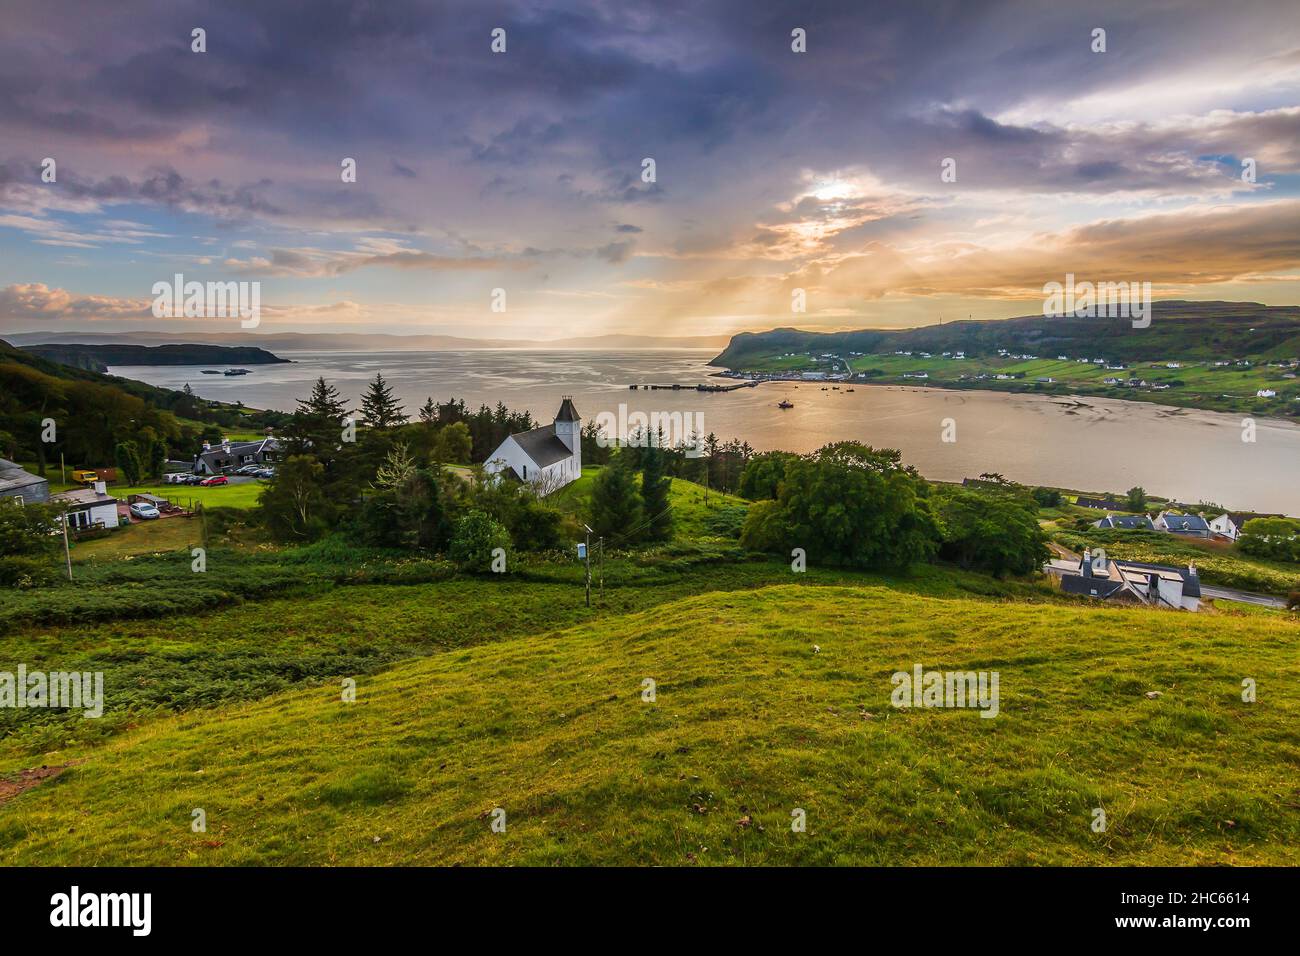 place in Scotland on the Isle of Skye. Church on a hill with green meadow and trees. View over the landscape with sun rays on the horizon. Dramatic cl Stock Photo